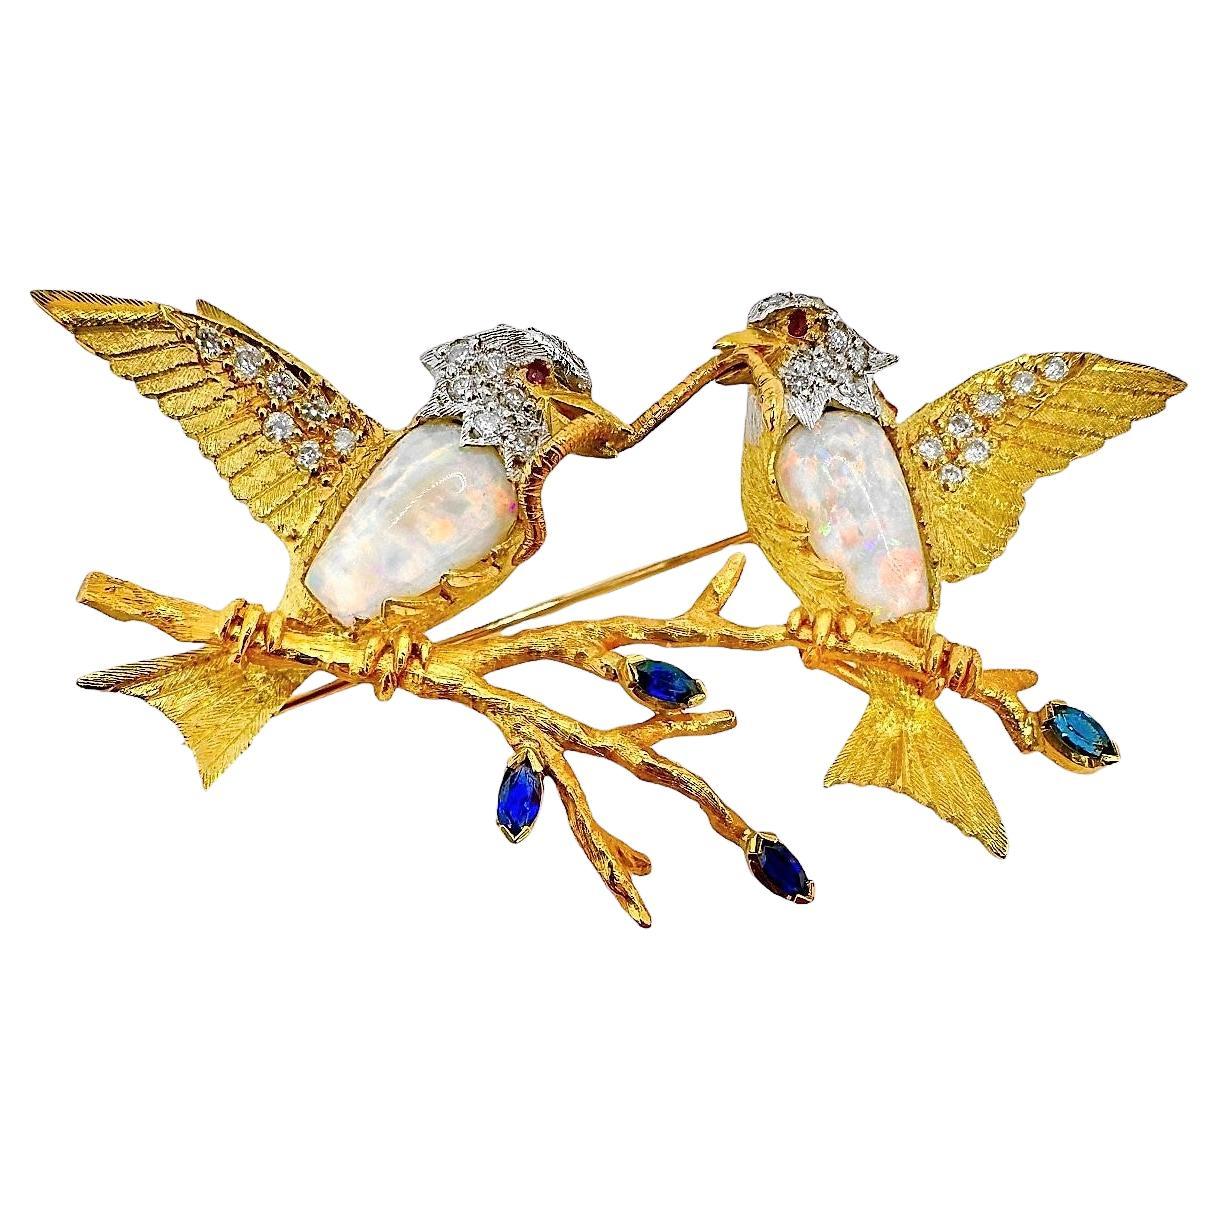 E. Wolf & Co 18k Gold, Opal, Sapphire & Diamond Brooch with 2 Birds on a Branch For Sale